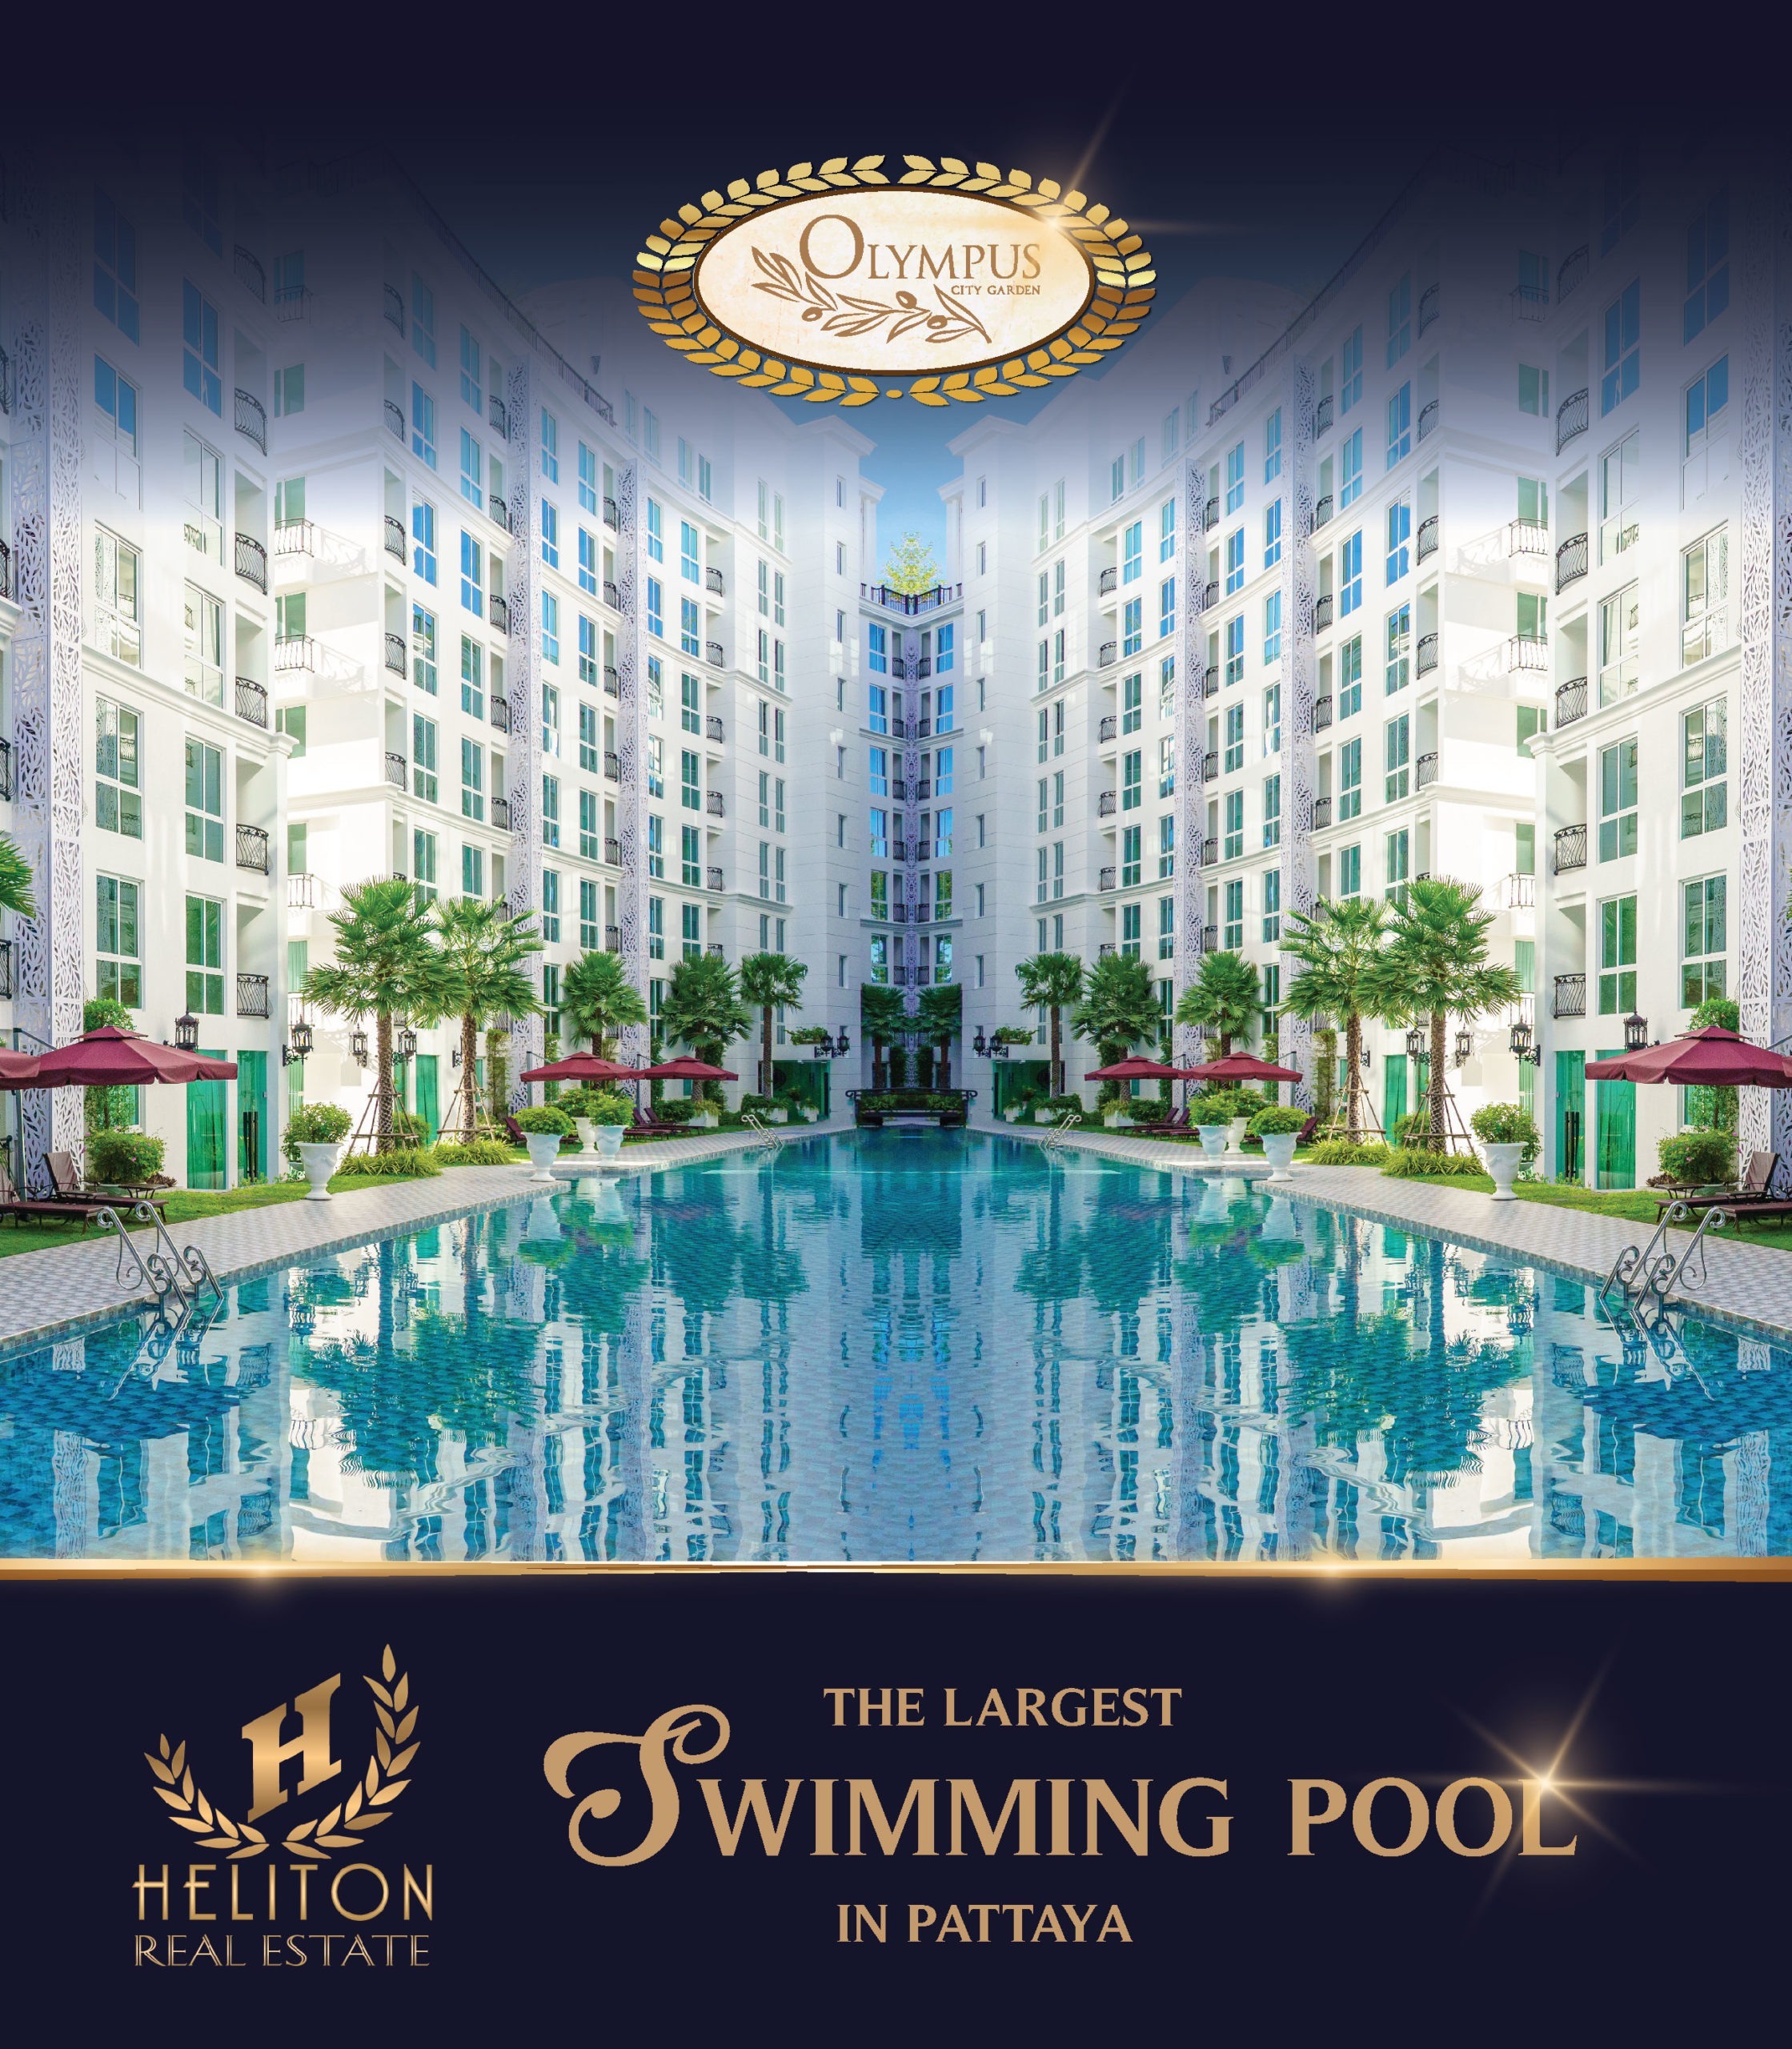 The Largest Swimming Pool in Pattaya